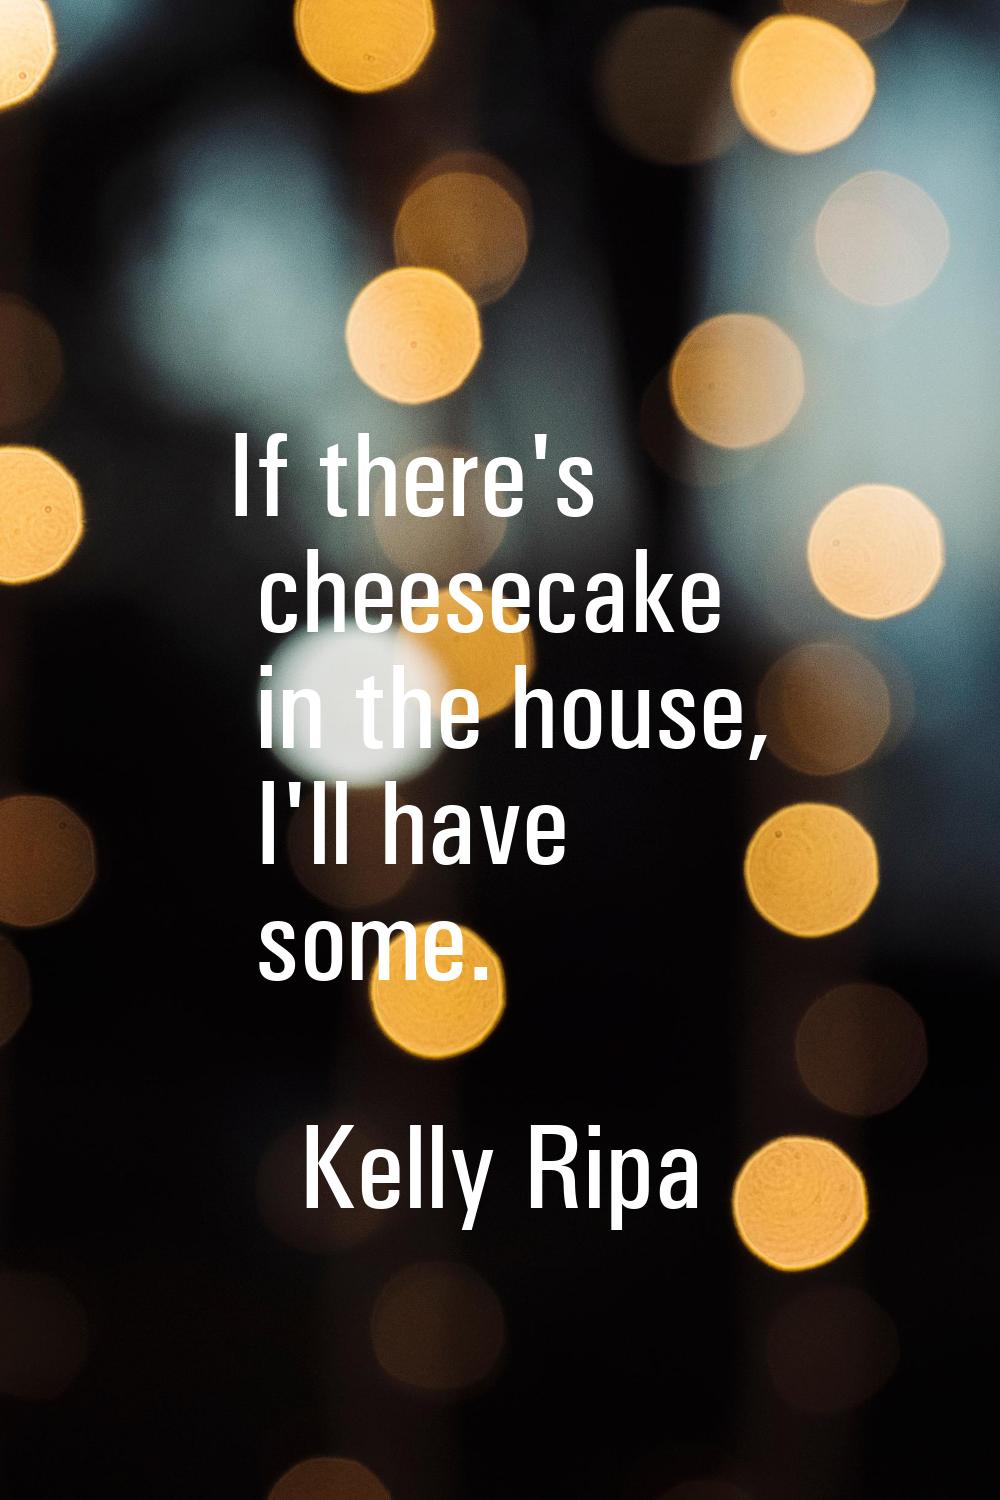 If there's cheesecake in the house, I'll have some.